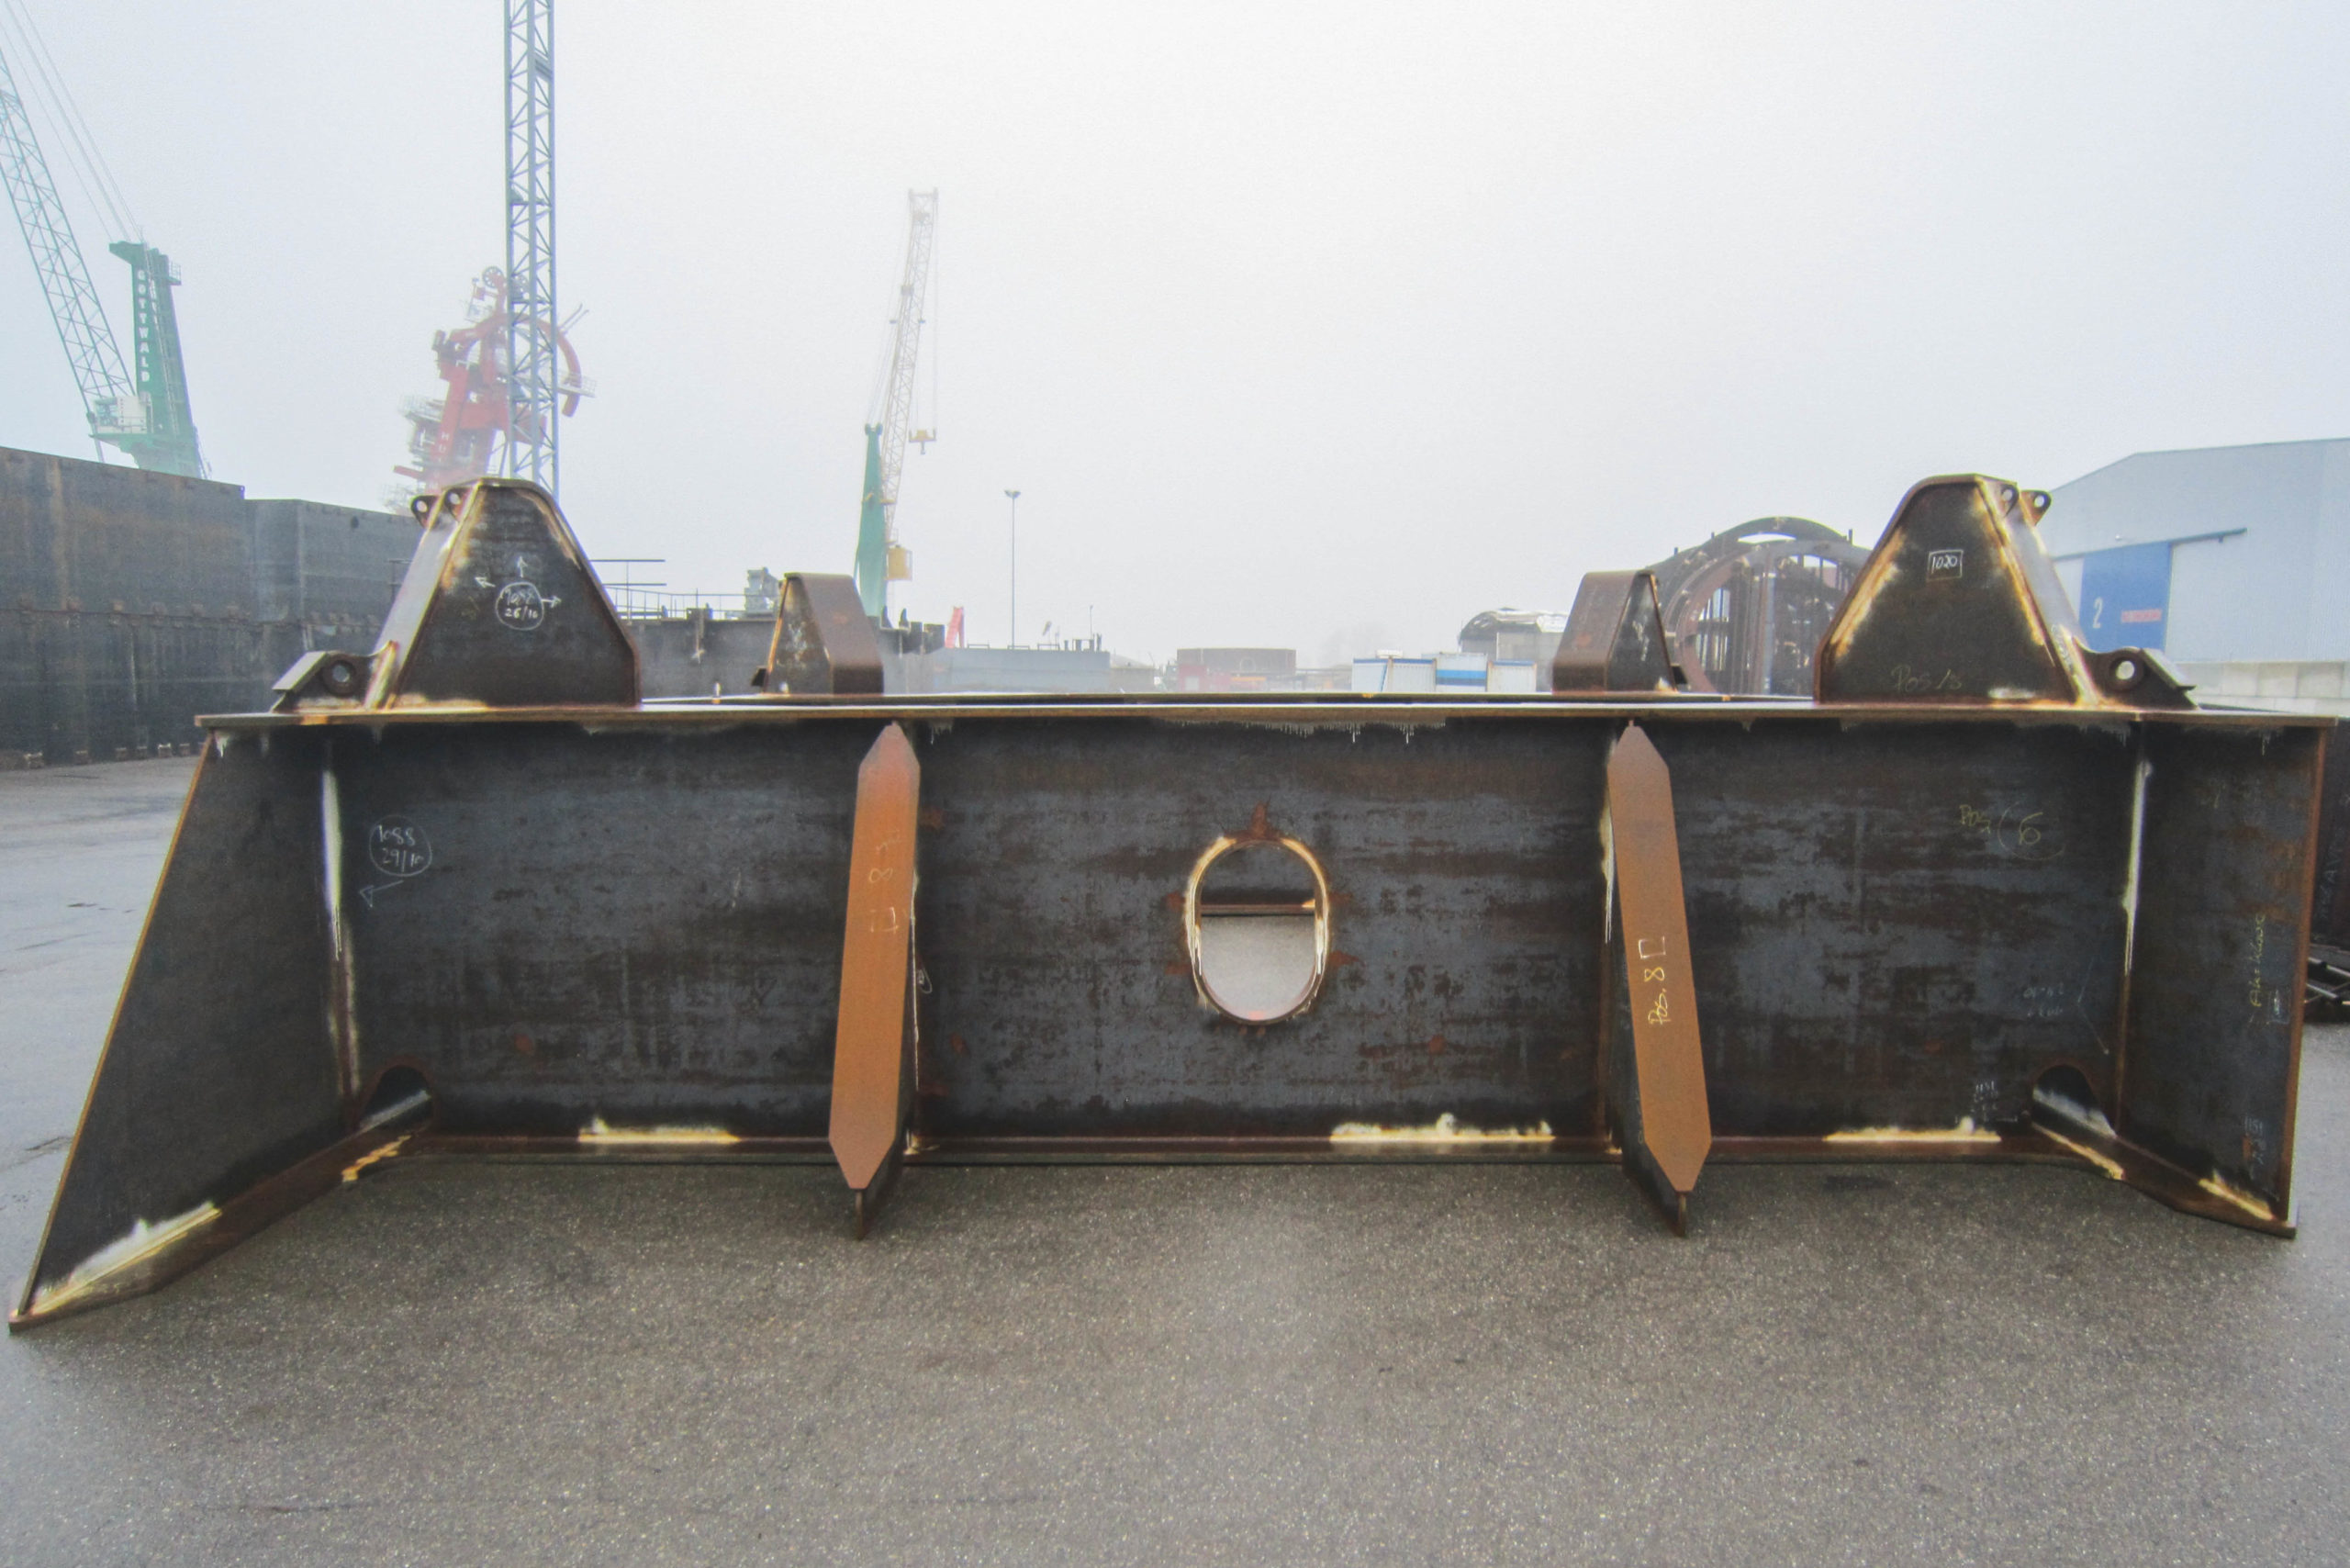 Seafastening support cradles for a Hydrohammer who can withstand the operational and transit loads during use